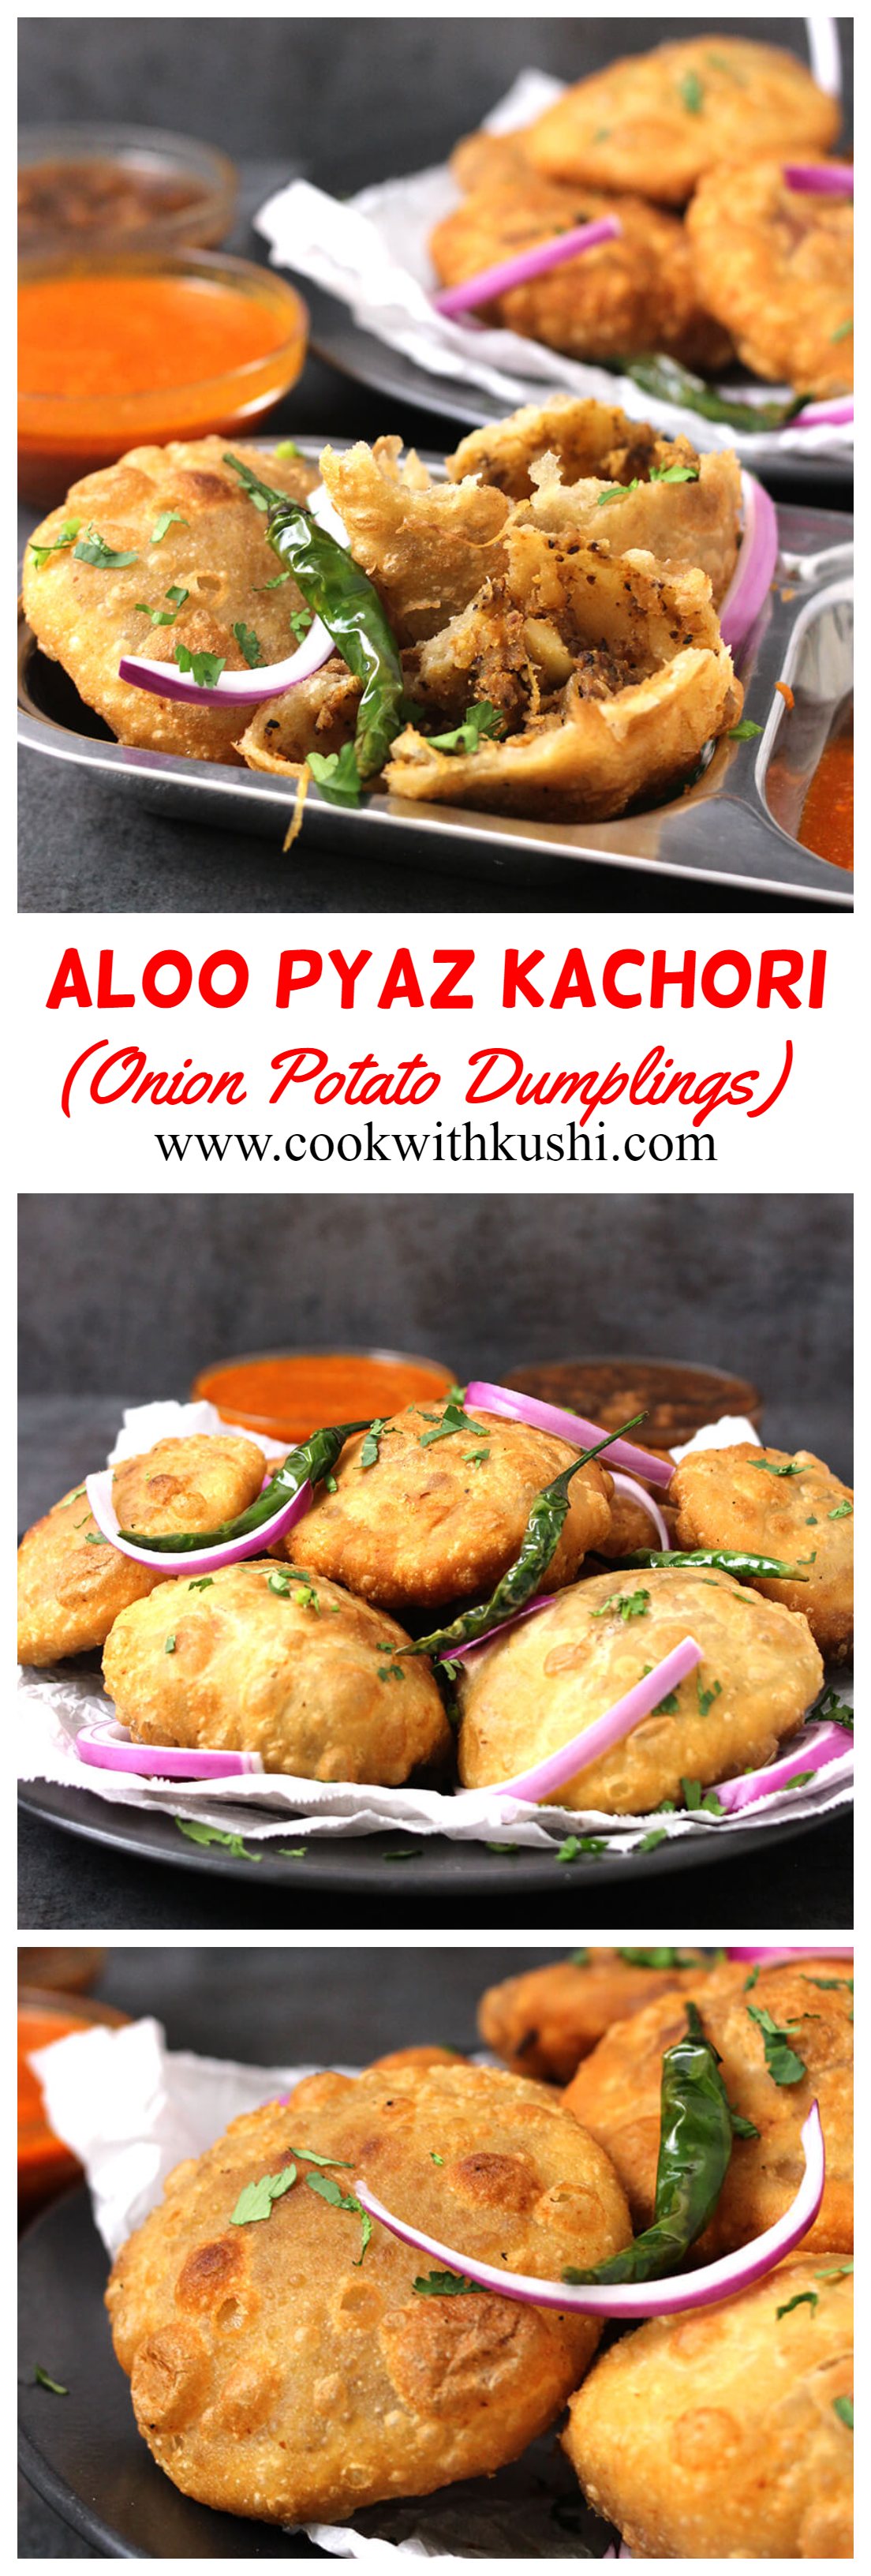 Aloo Pyaz Kachori or Onion Potato Dumplings are popular Indian snack with crispy and flaky texture on the outside and spicy, delightful and flavorful filling on the inside. #diwalisnacks #diwalirecipes #diwalipartyideas #paapdichaat #alookikachori #rajkachori #indianstreetfood #indiansnacks #vegansnacks #mashedpotatodumplings